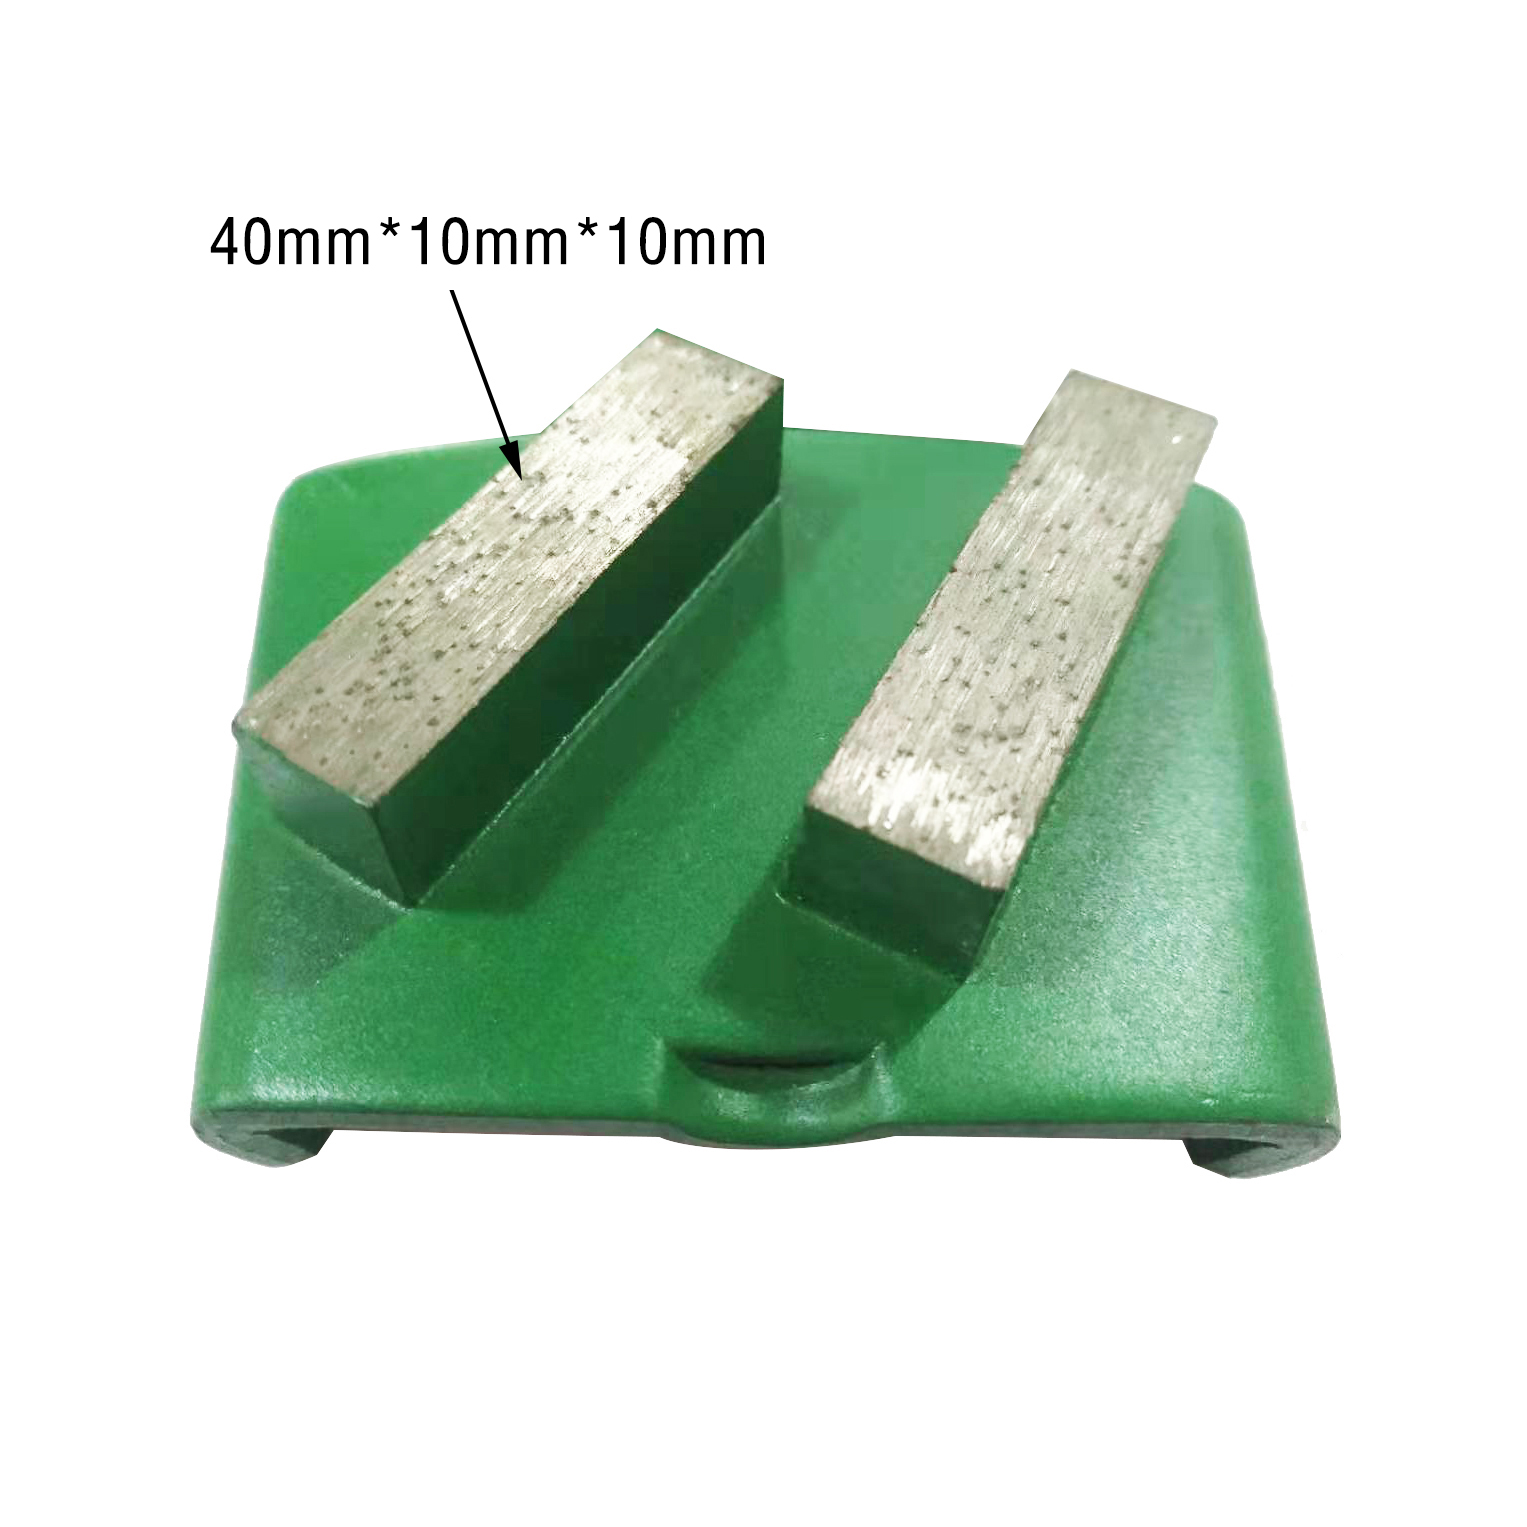 Diamond HTC Grinding Pads Double Strip Shoes